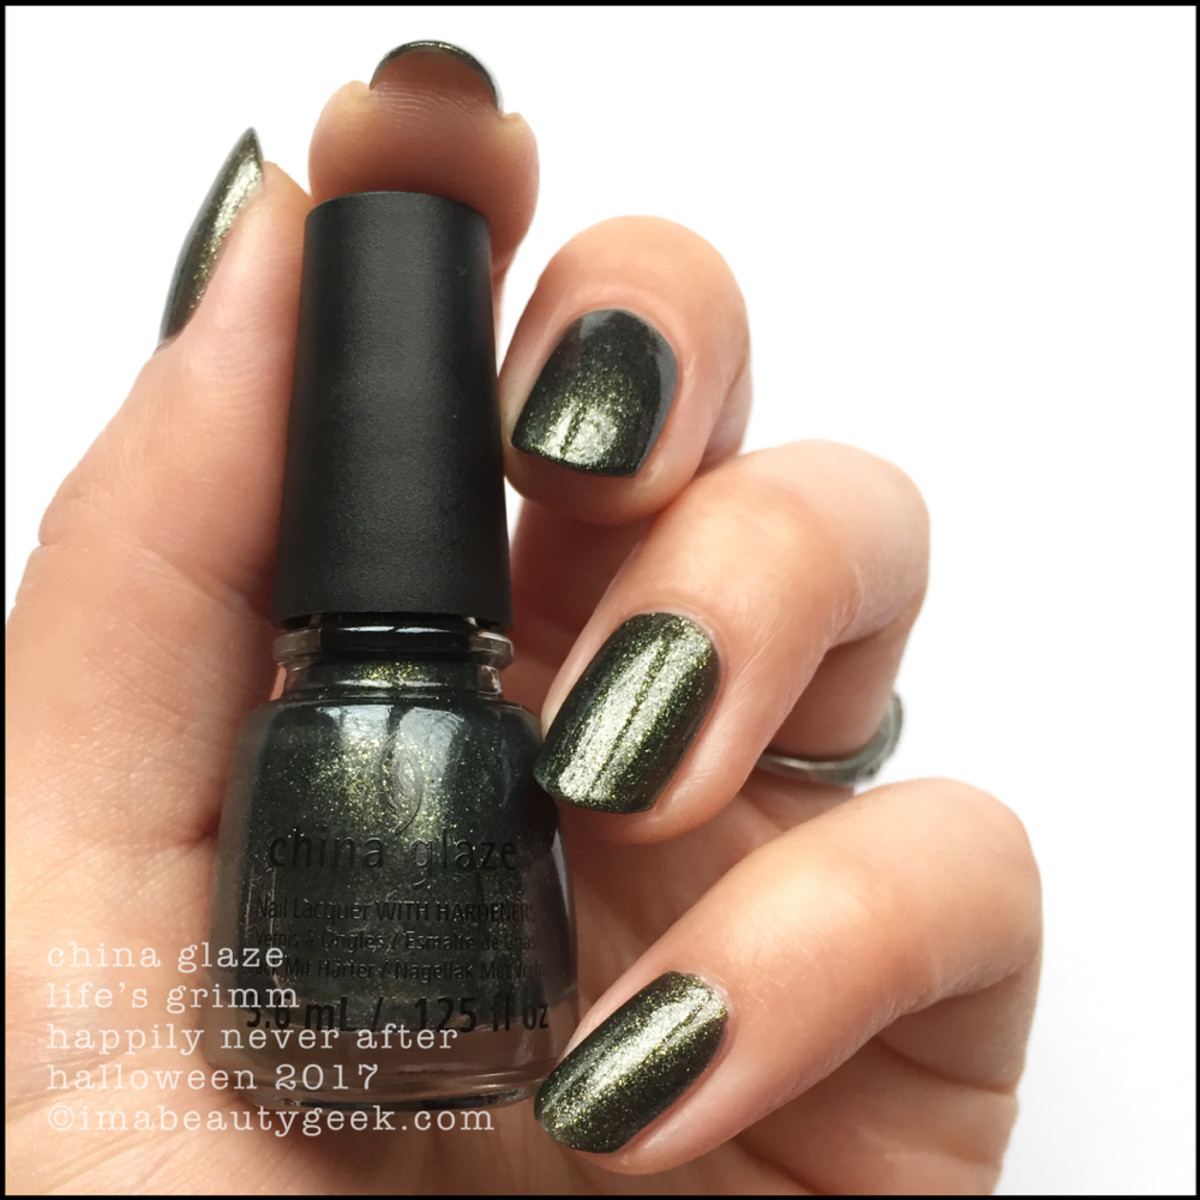 China Glaze Life's Grimm _ China Glaze Happily Never After Collection Halloween 2017